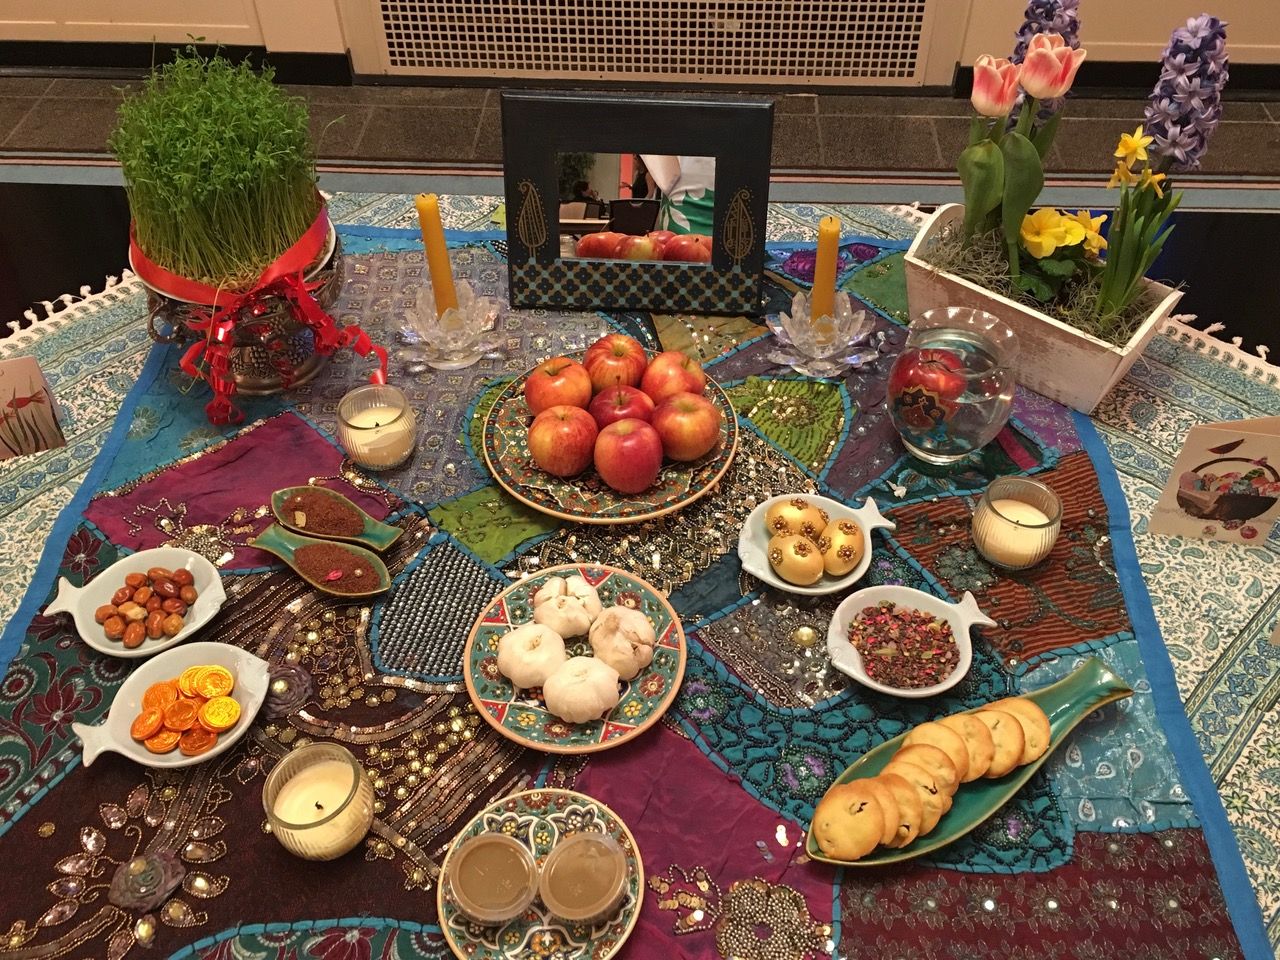 Photo of a colorful, festive Haft-Sin, set for Nowruz. There are candles, fruits, flowers, and small dishes of various foods set on top of multi-colored patchwork fabric. At the back is a framed mirror and a raised, decorative pot filled with green grass.